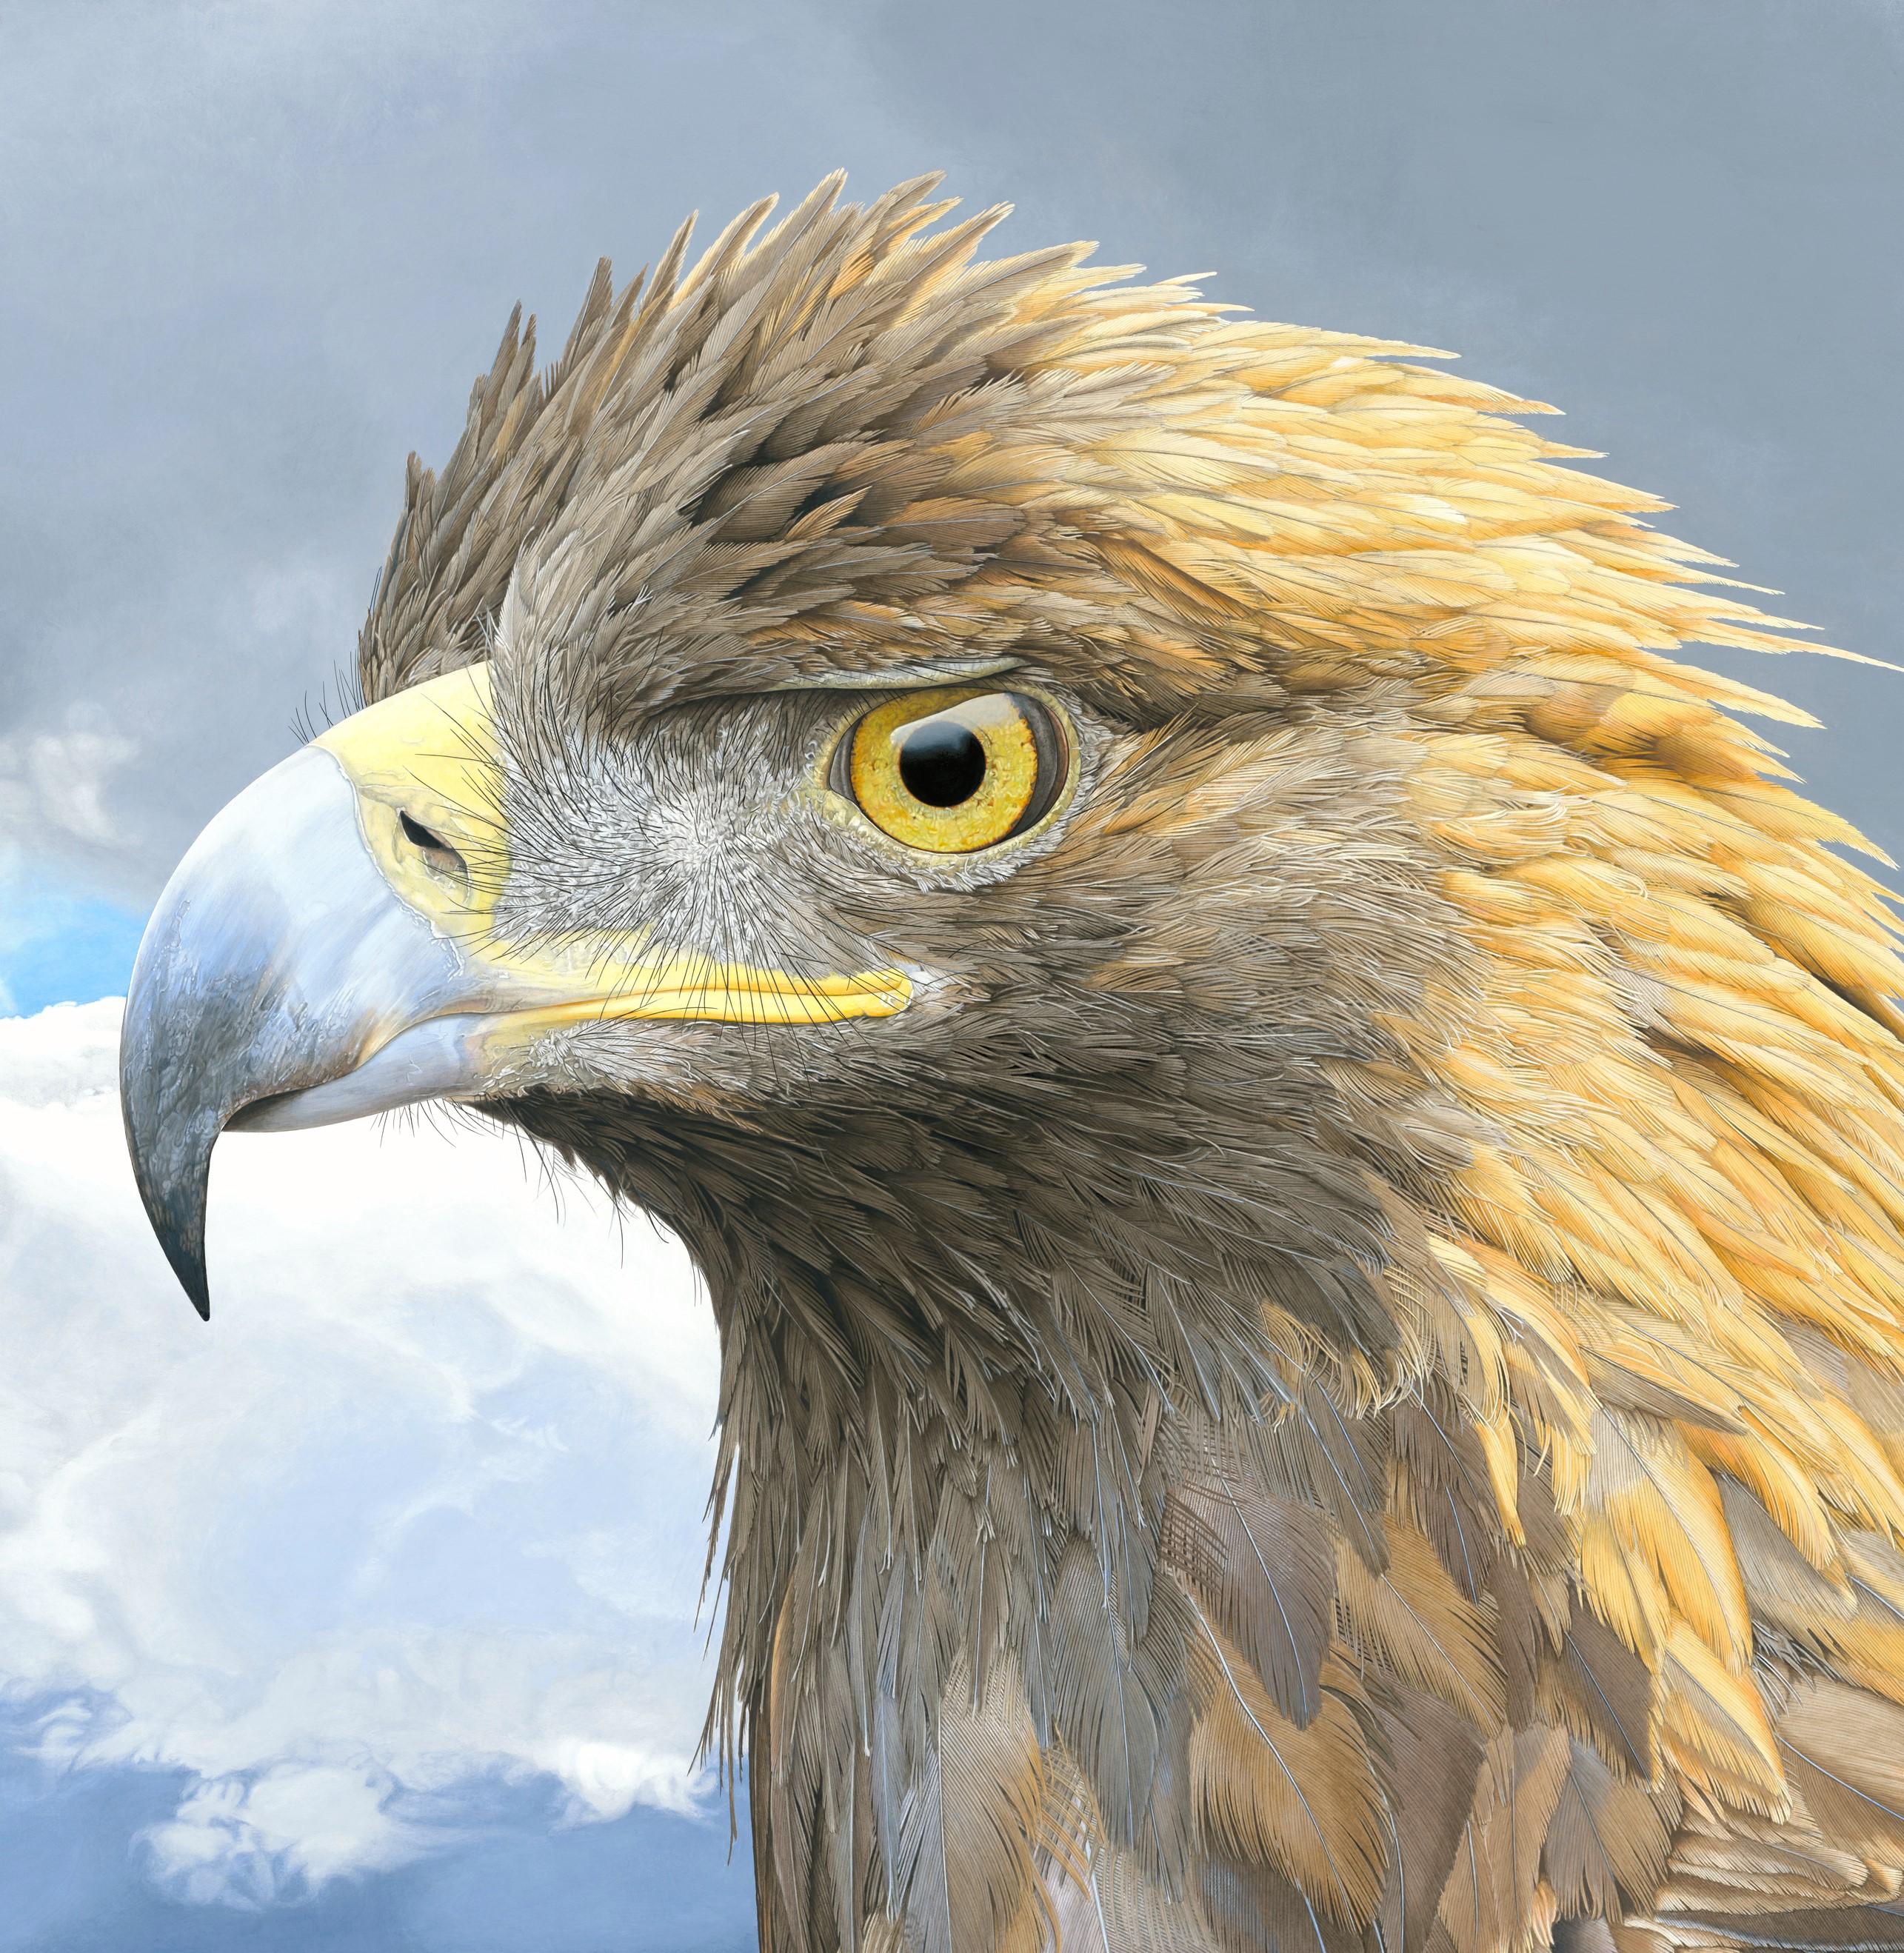 Polychrome Eagle - Photorealistic Portrait of a Golden Eagle In Denali, Framed - Painting by Rick Pas